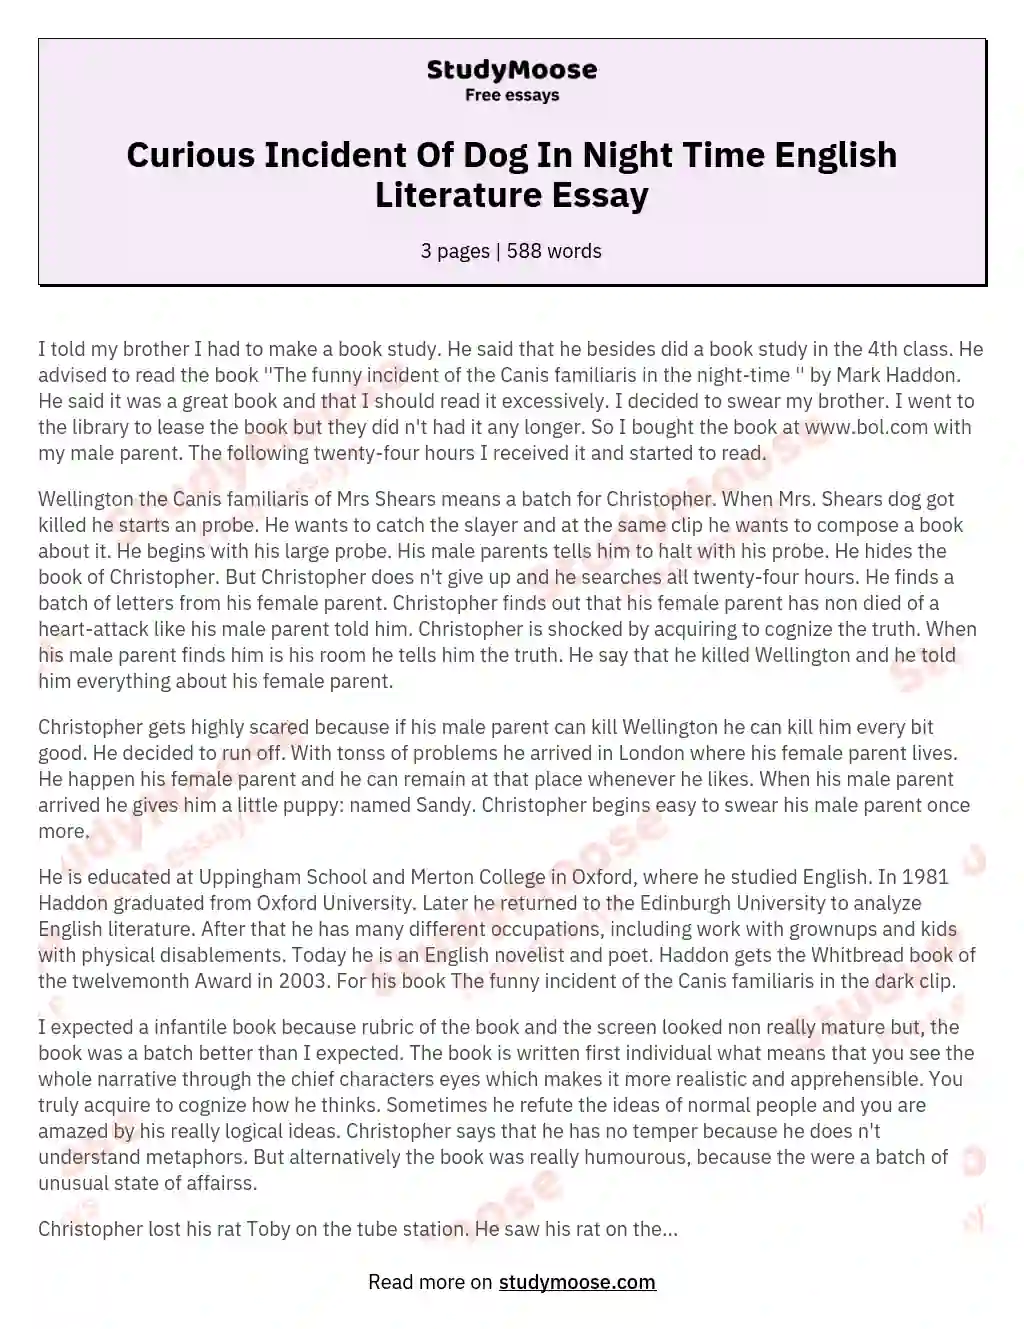 Curious Incident Of Dog In Night Time English Literature Essay